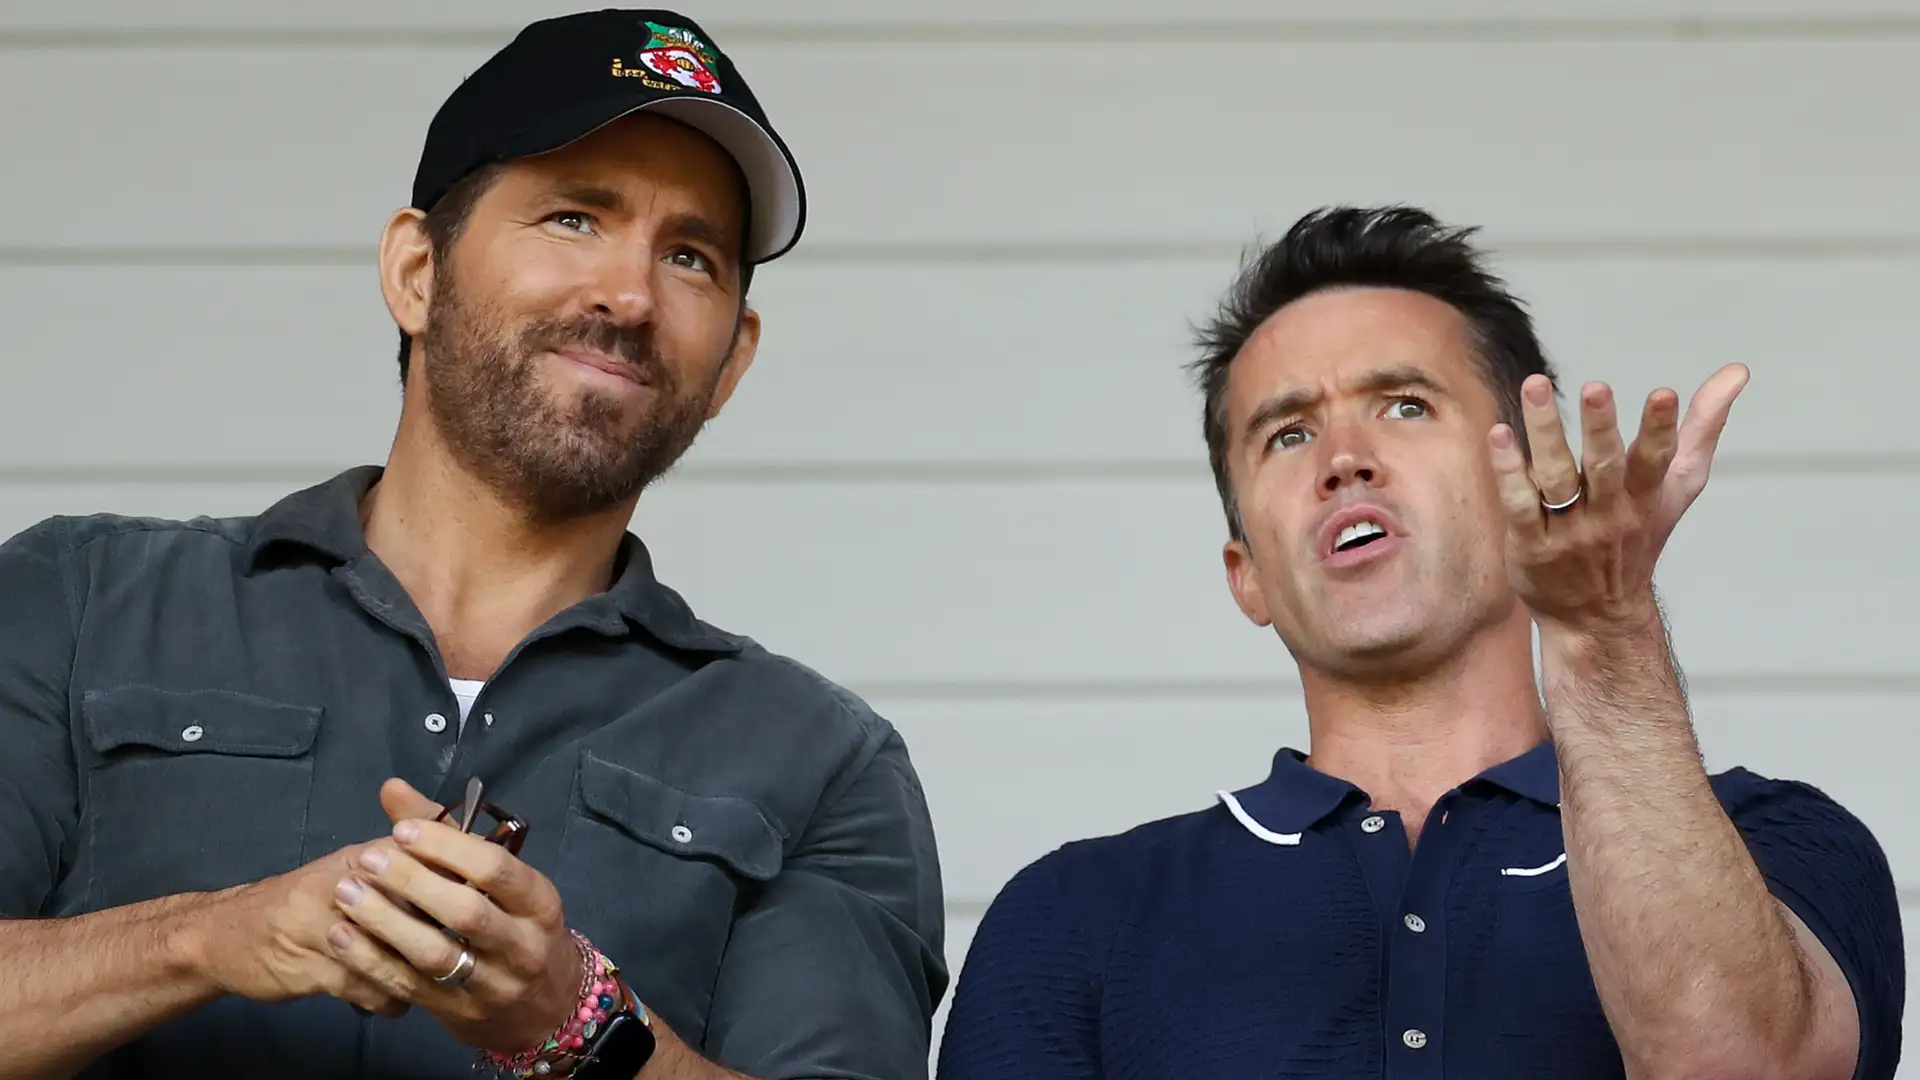 Not a Welcome to Wrexham fan?! Rob McElhenney’s name butchered on game show despite Ryan Reynolds explainer – leading Red Dragons co-owner to make birth certificate joke